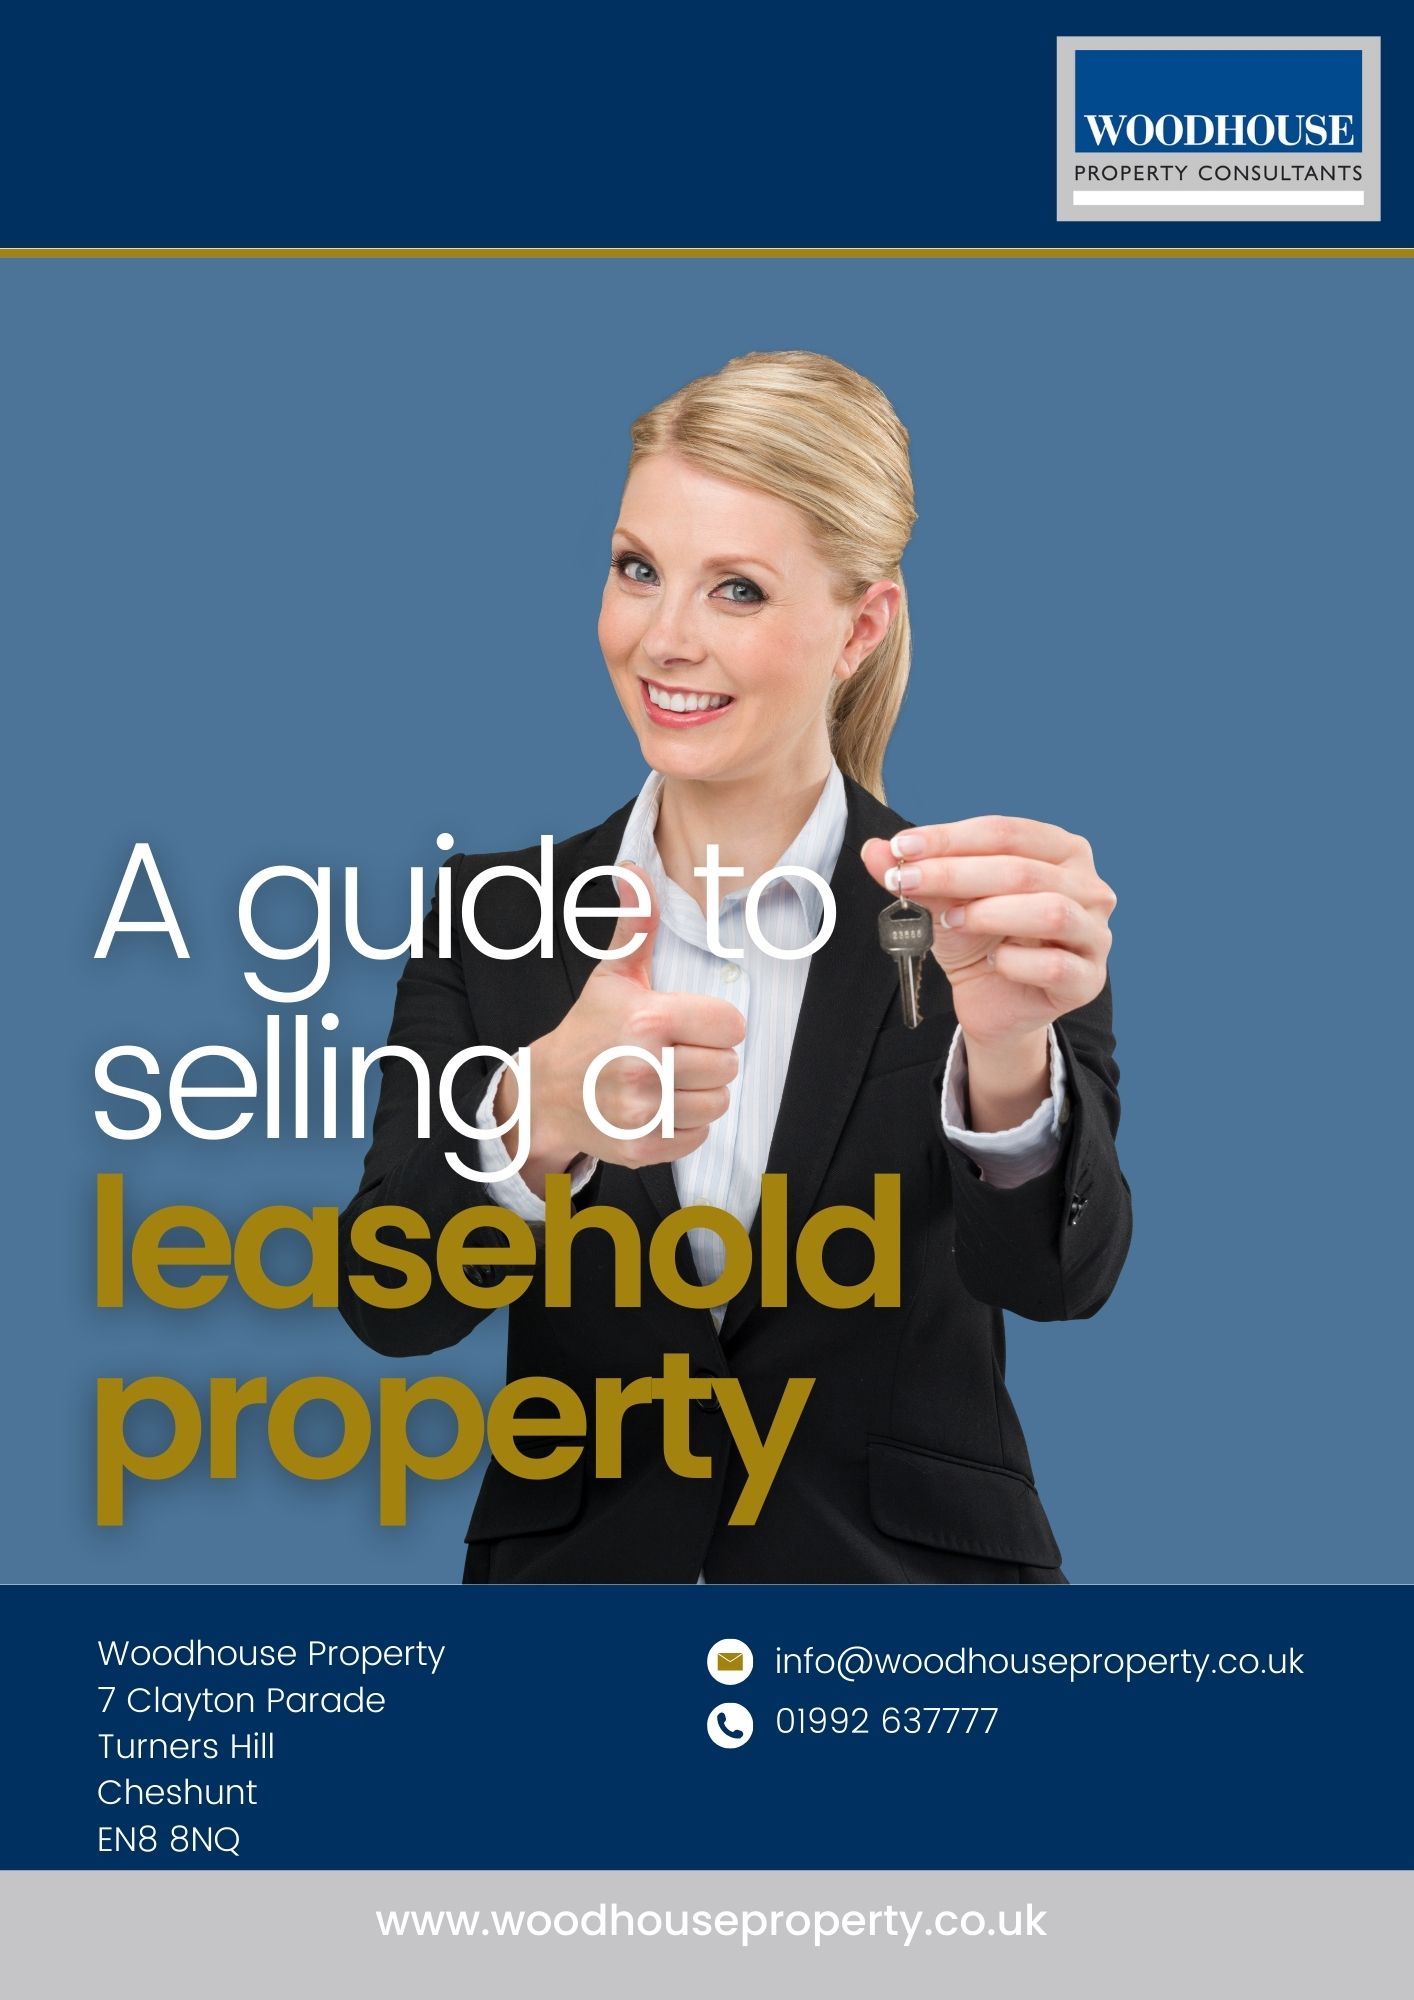 A guide to selling a leasehold property